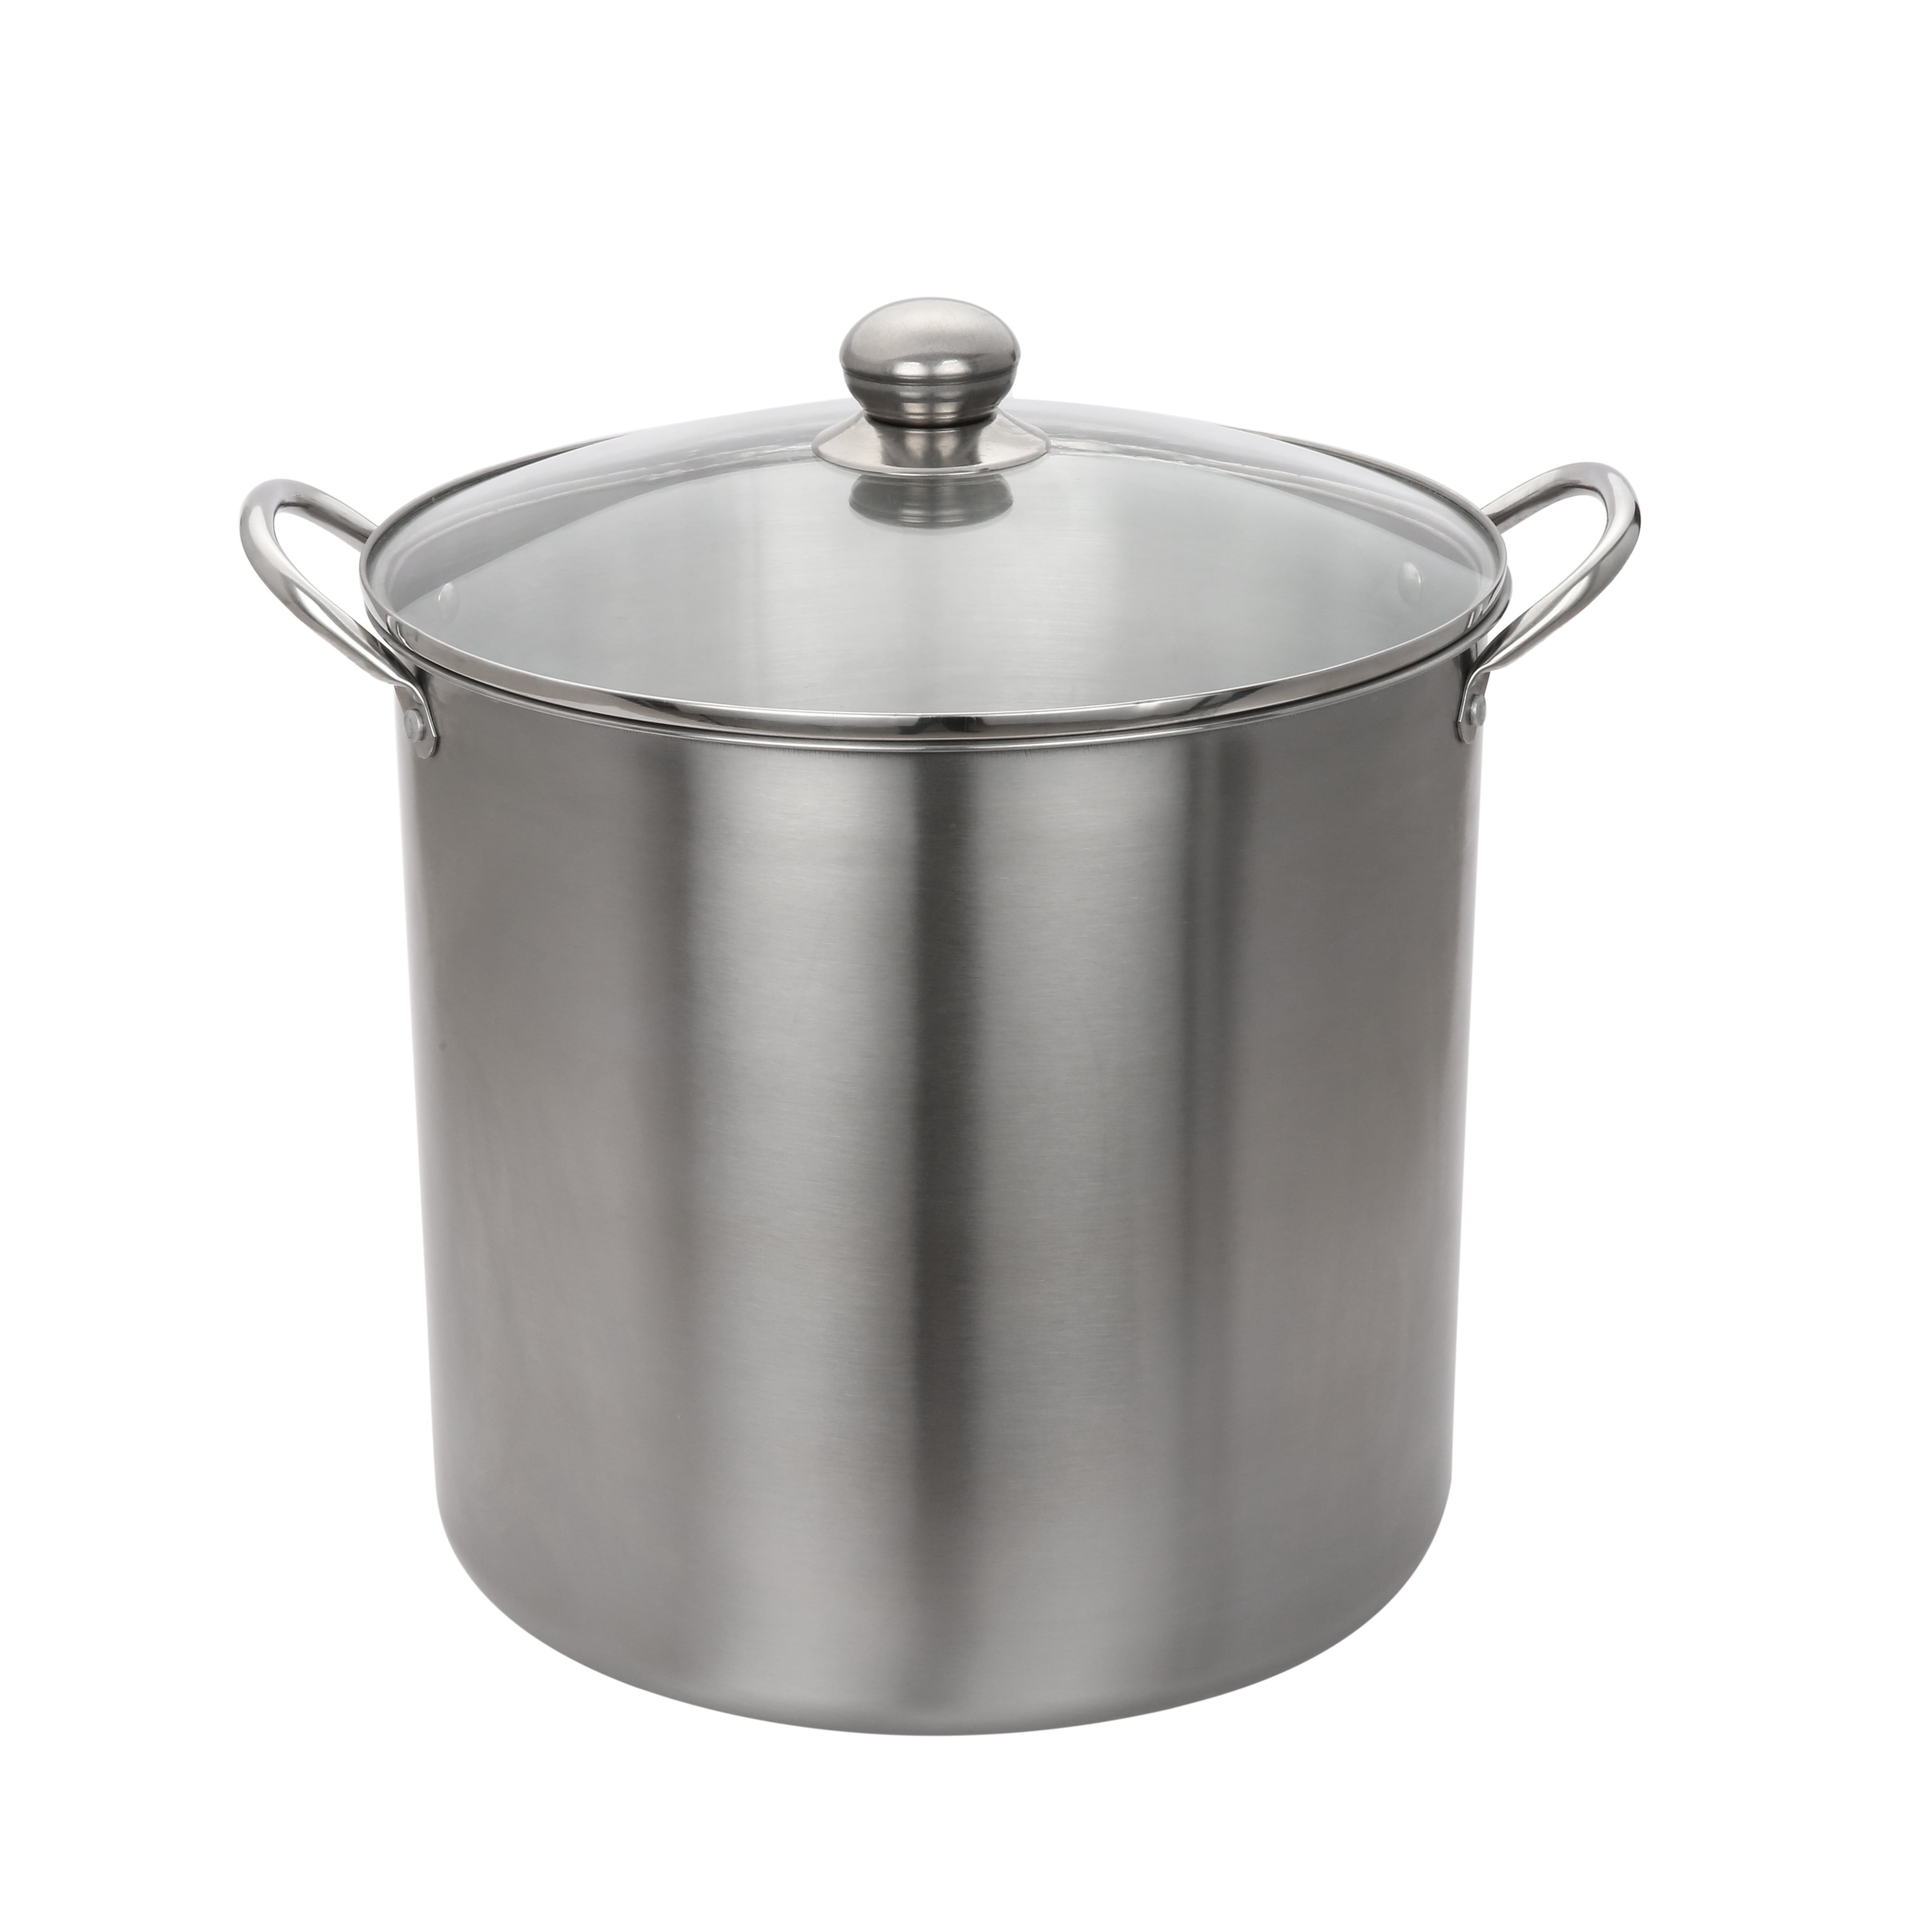 Mainstays Stainless Steel 4 Quart Steamer Pot with Steamer Insert and Lid